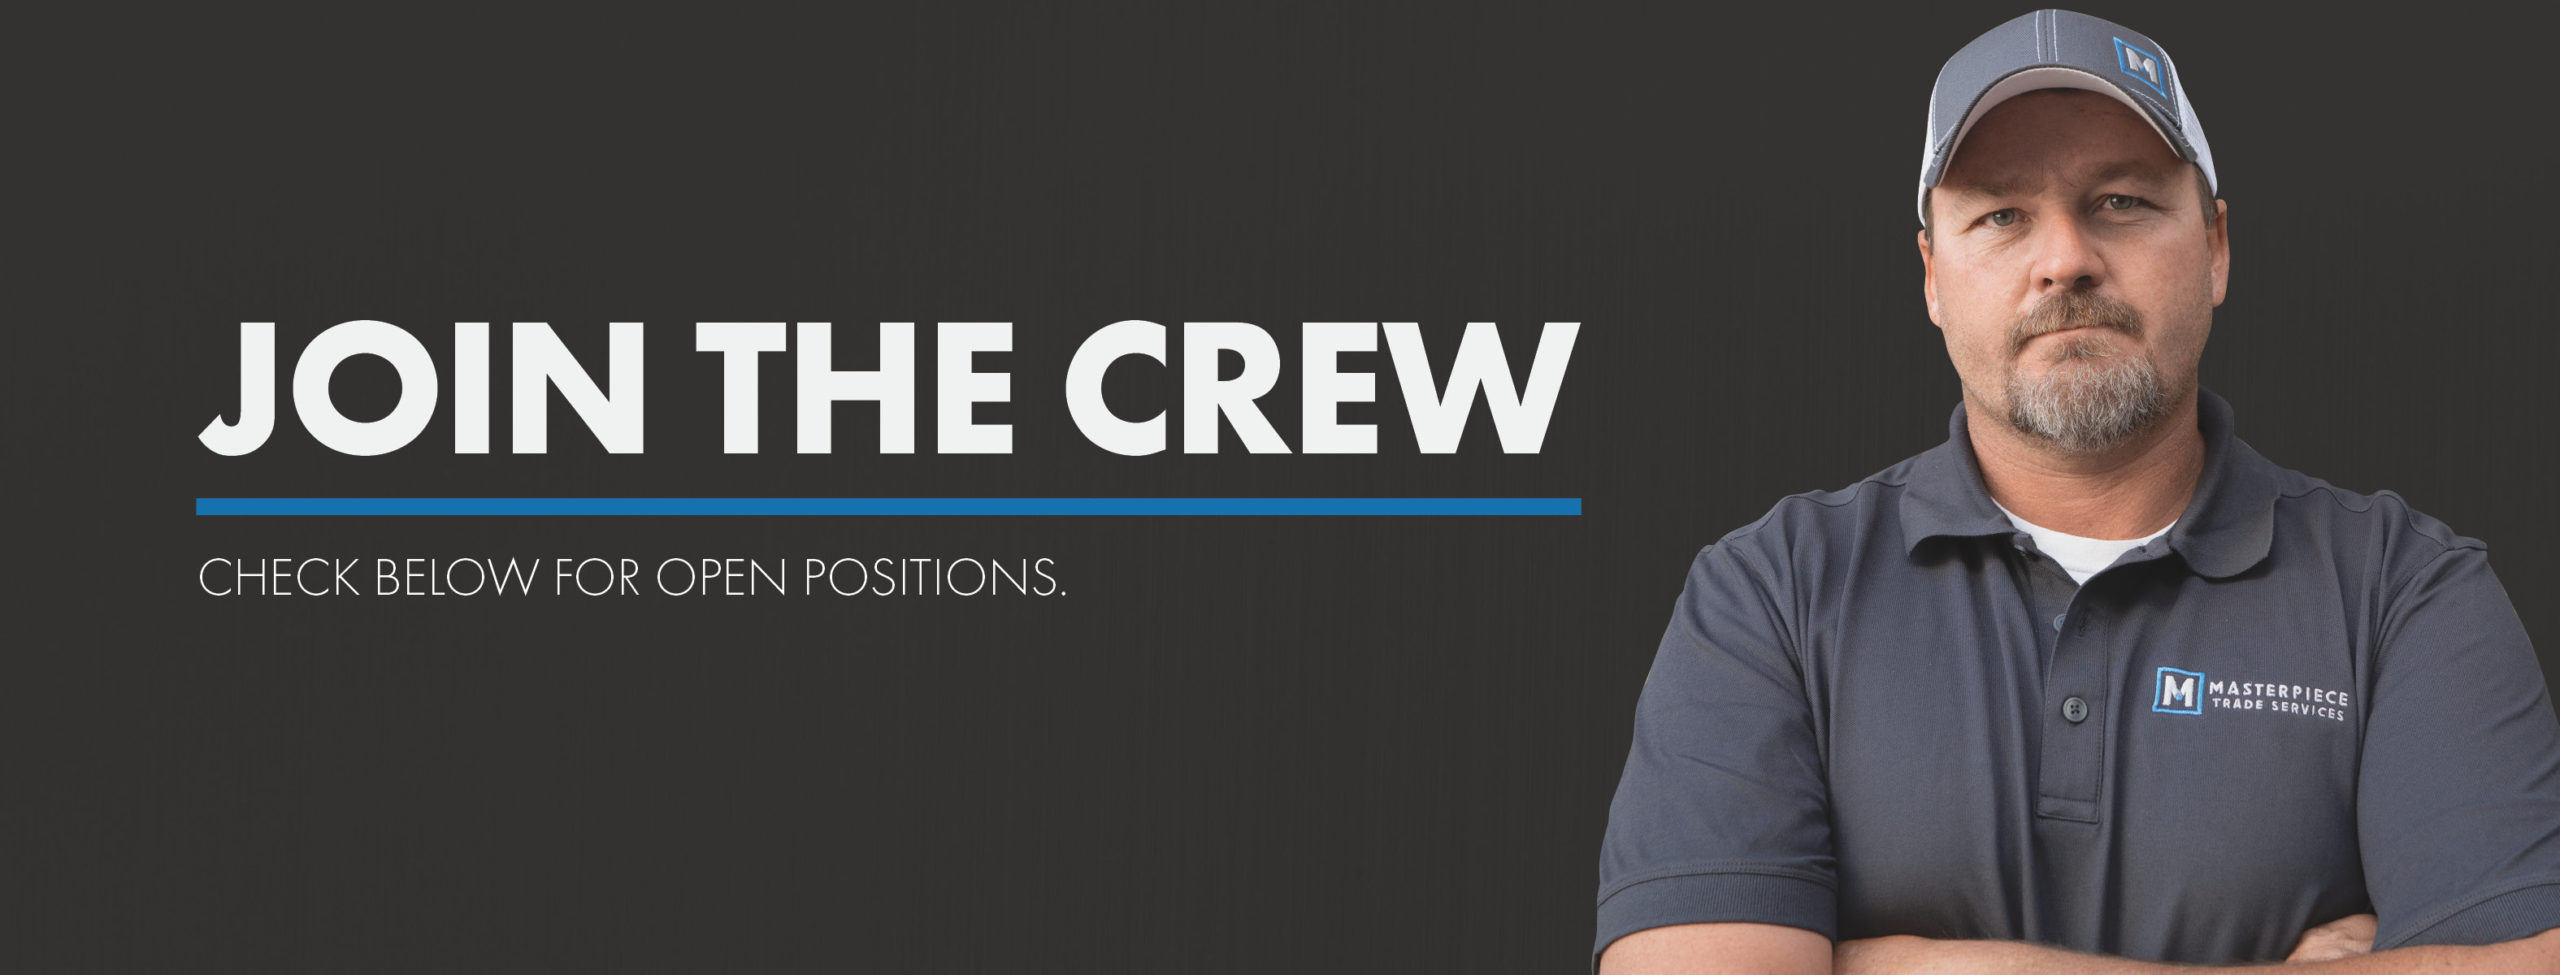 Join the Crew-1